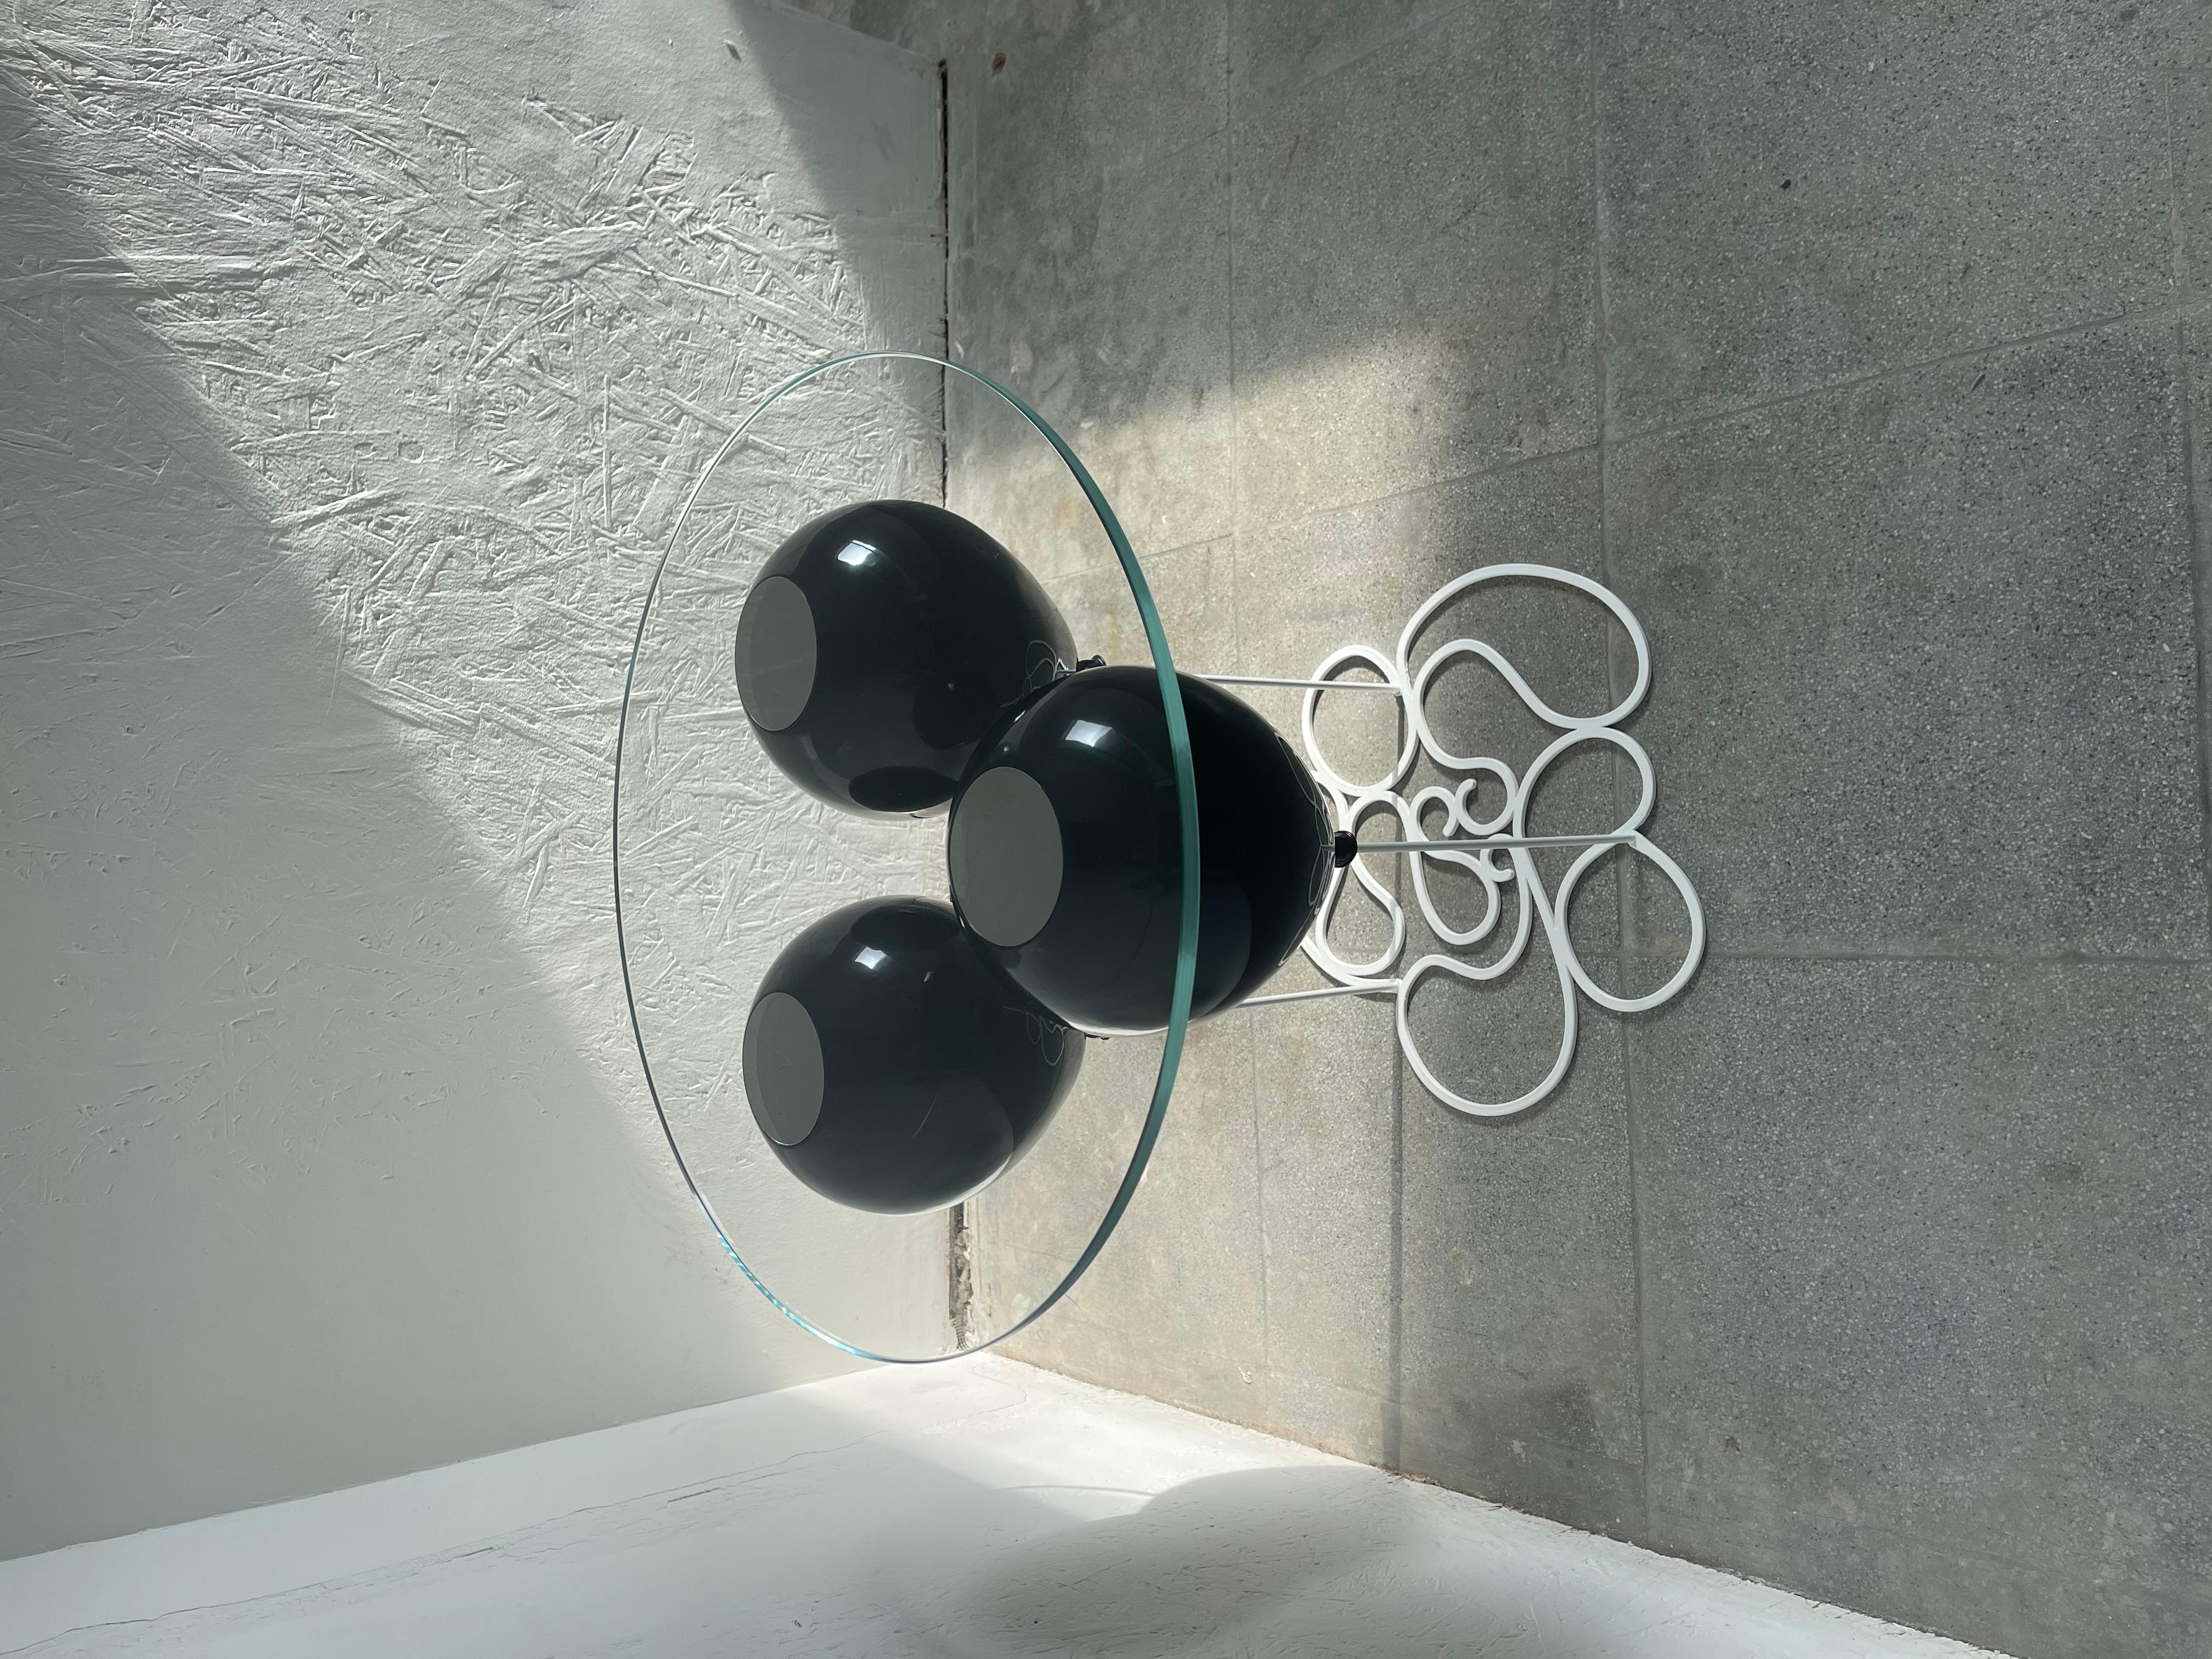 The UP! Balloon side table is a playful trompe l’oeil furniture piece. A trio of black metallic balloons impresses the illusion of a levitating glass tabletop.

An engaging furniture piece that plays with the concepts of levitation and buoyancy,